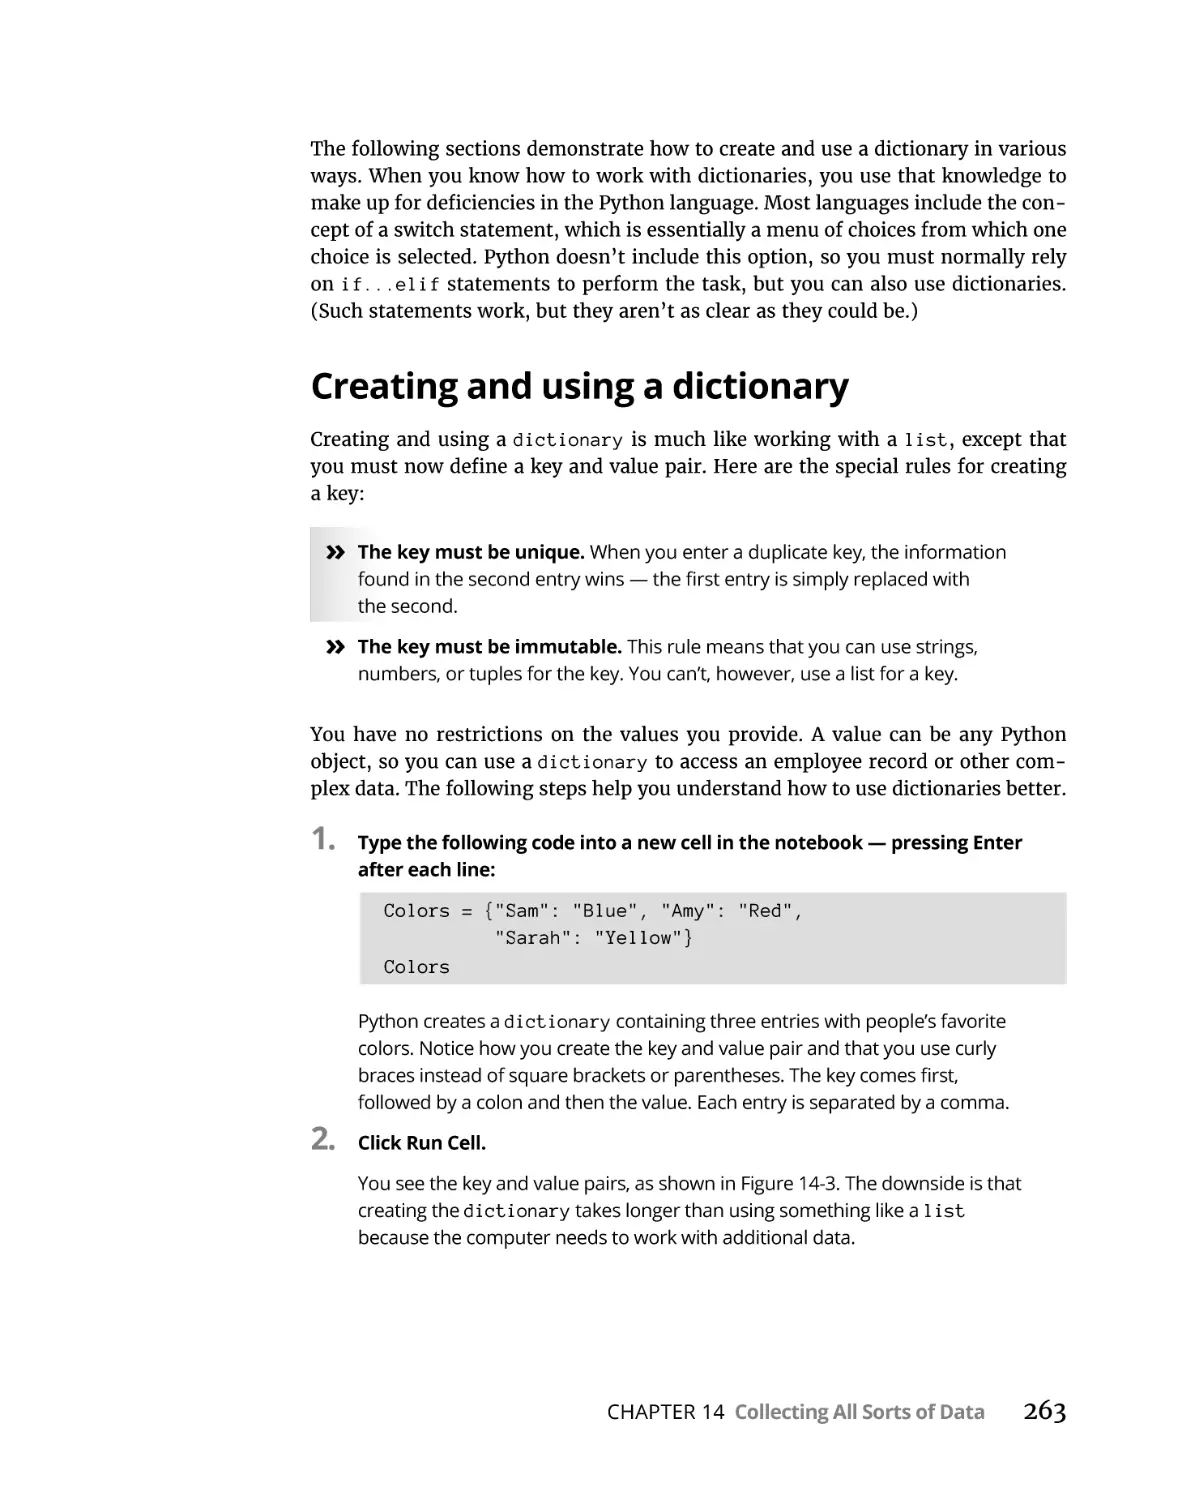 Creating and using a dictionary